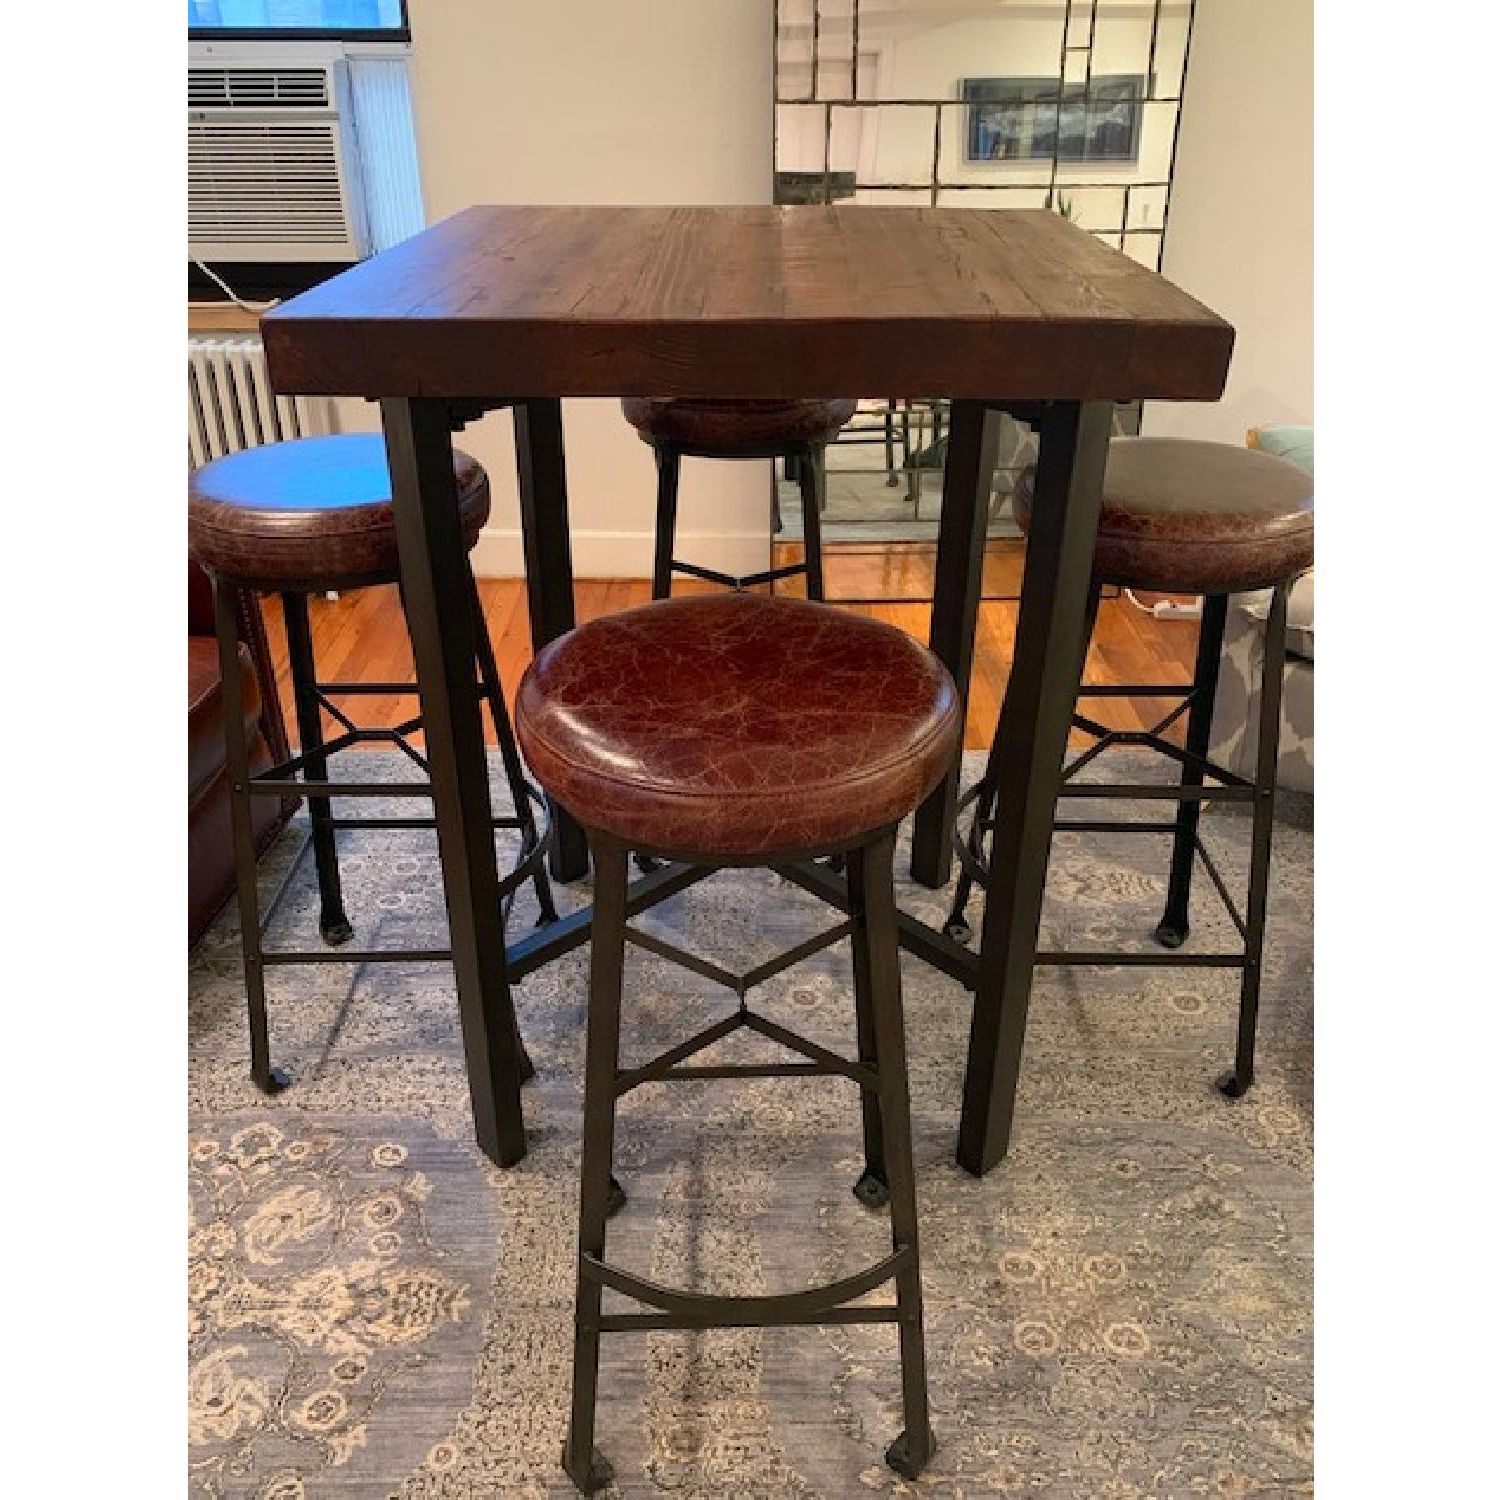 Most Recent Pottery Barn Griffin Bar Table W/ 4 Stools – Aptdeco Regarding Griffin Reclaimed Wood Dining Tables (View 23 of 25)